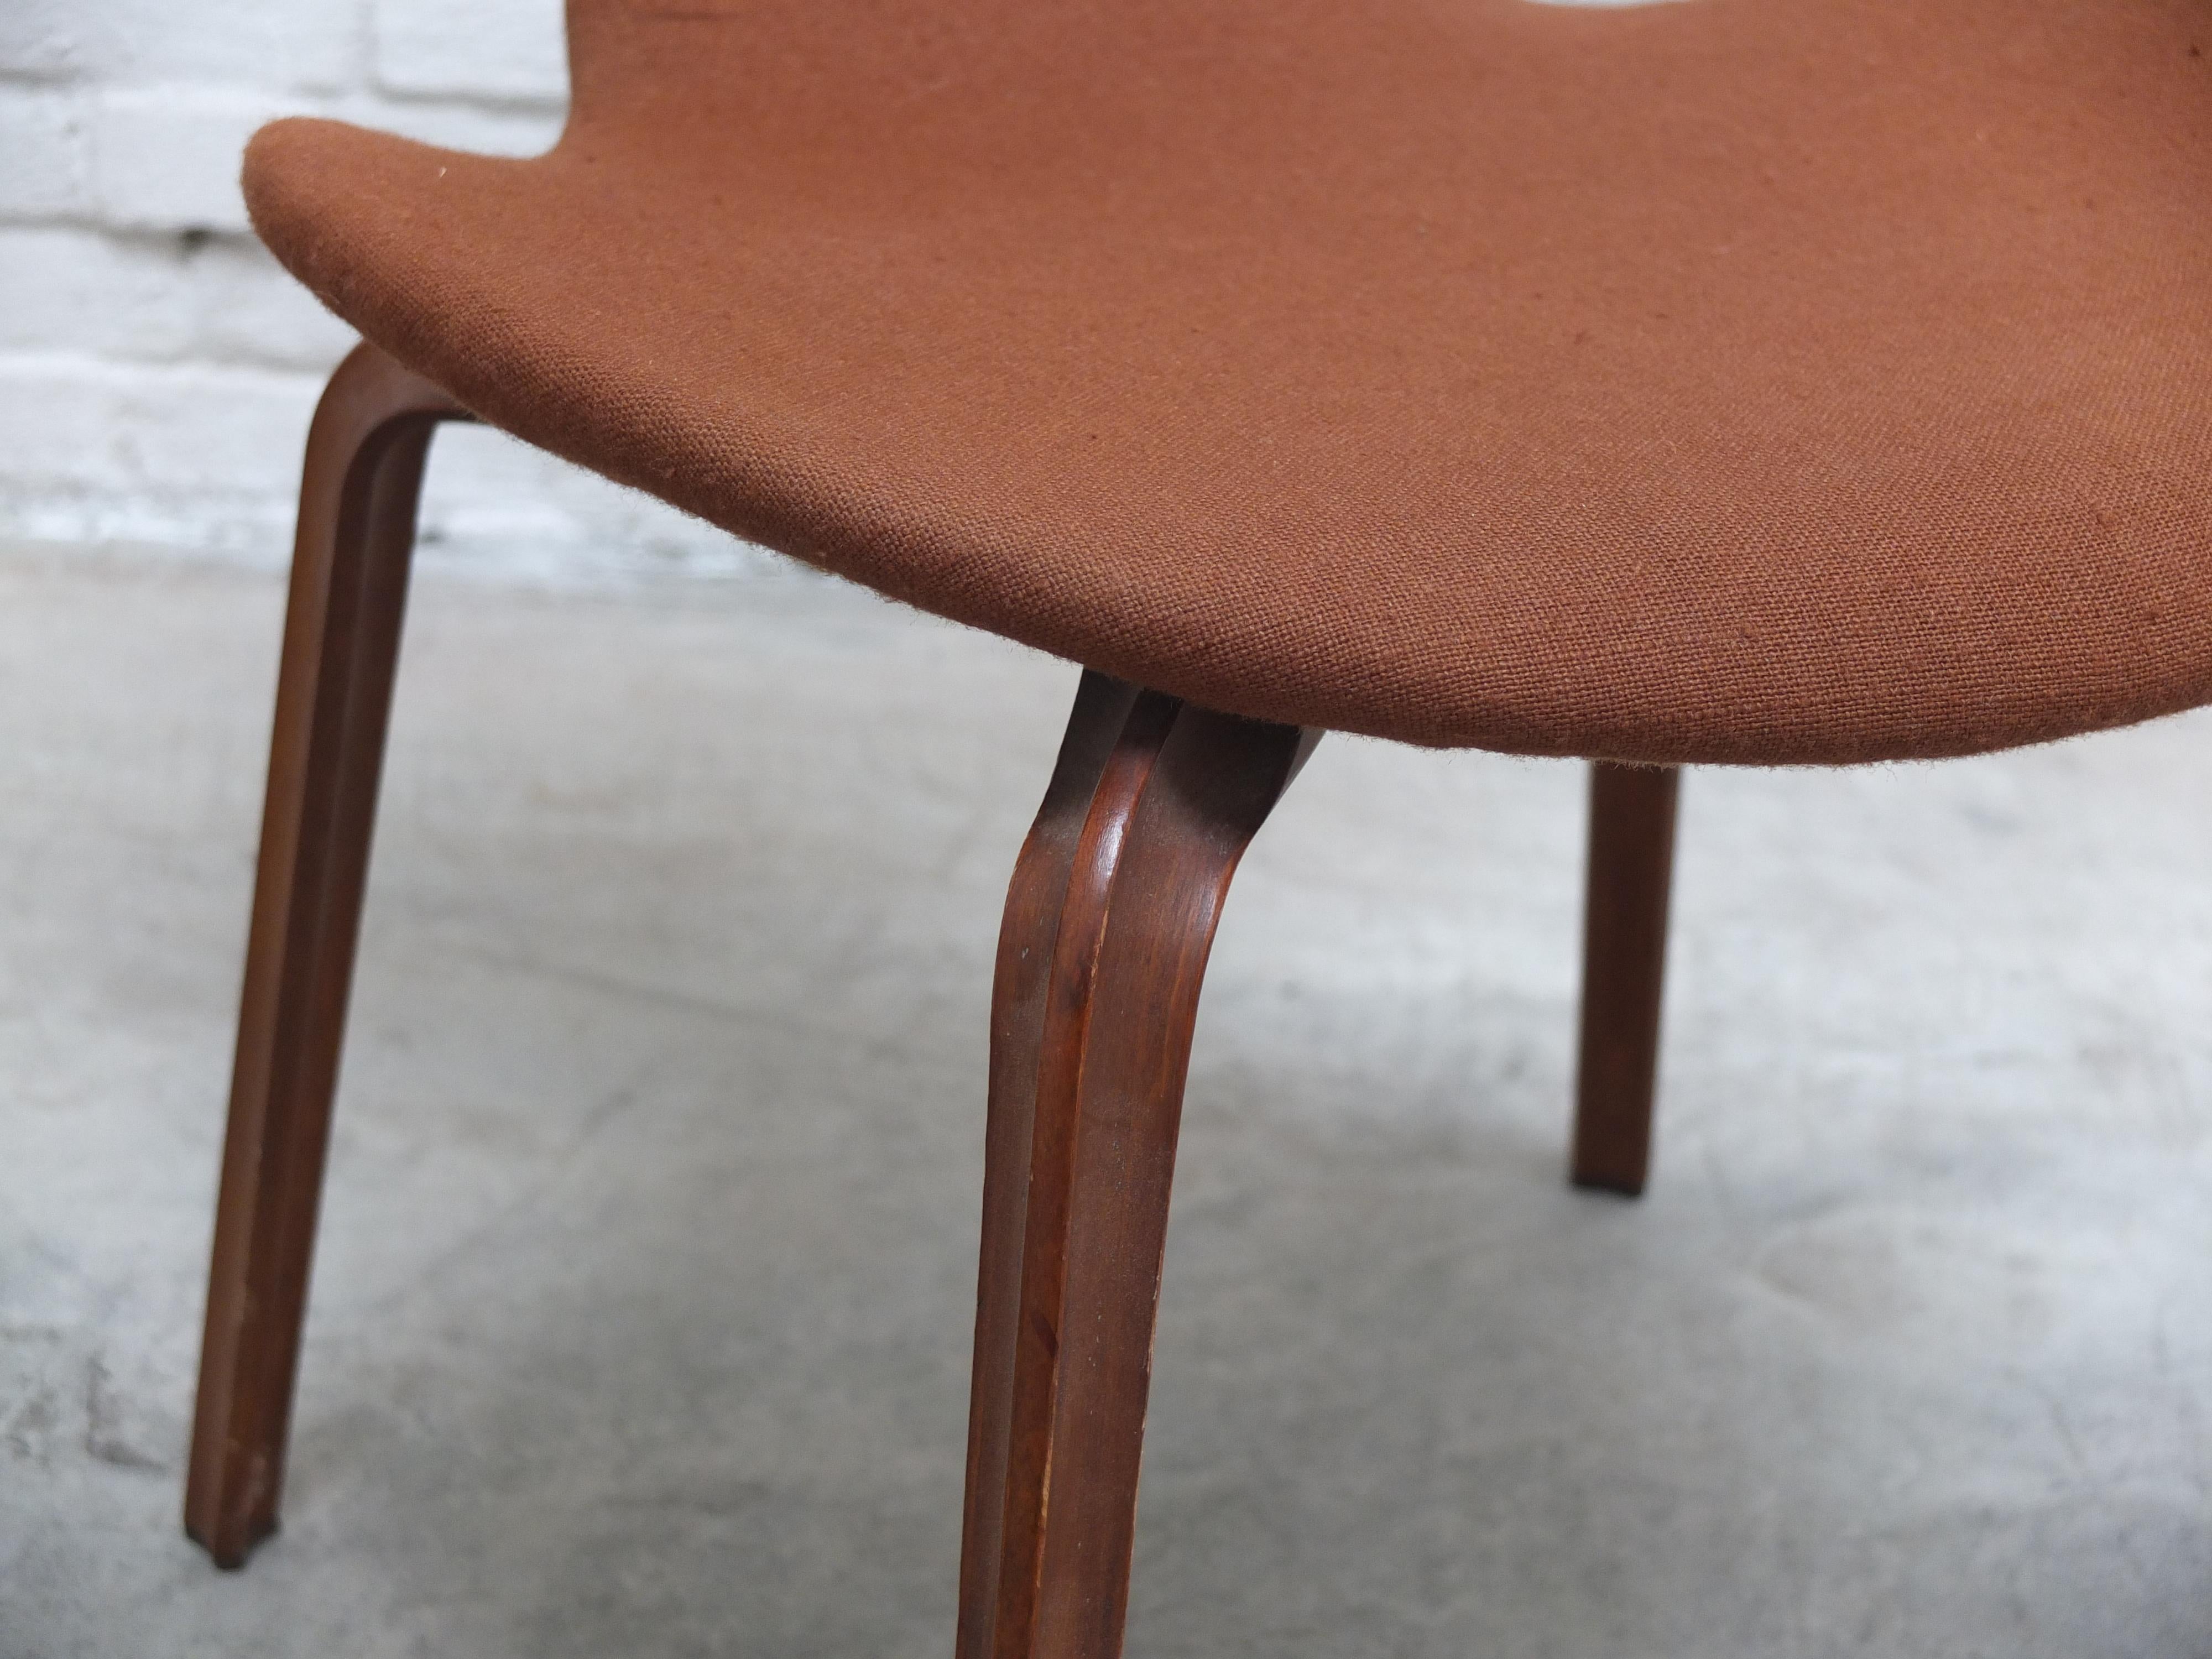 Set of 4 1st Edition 'Grand Prix' Chairs by Arne Jacobsen for Fritz Hansen, 1957 For Sale 1